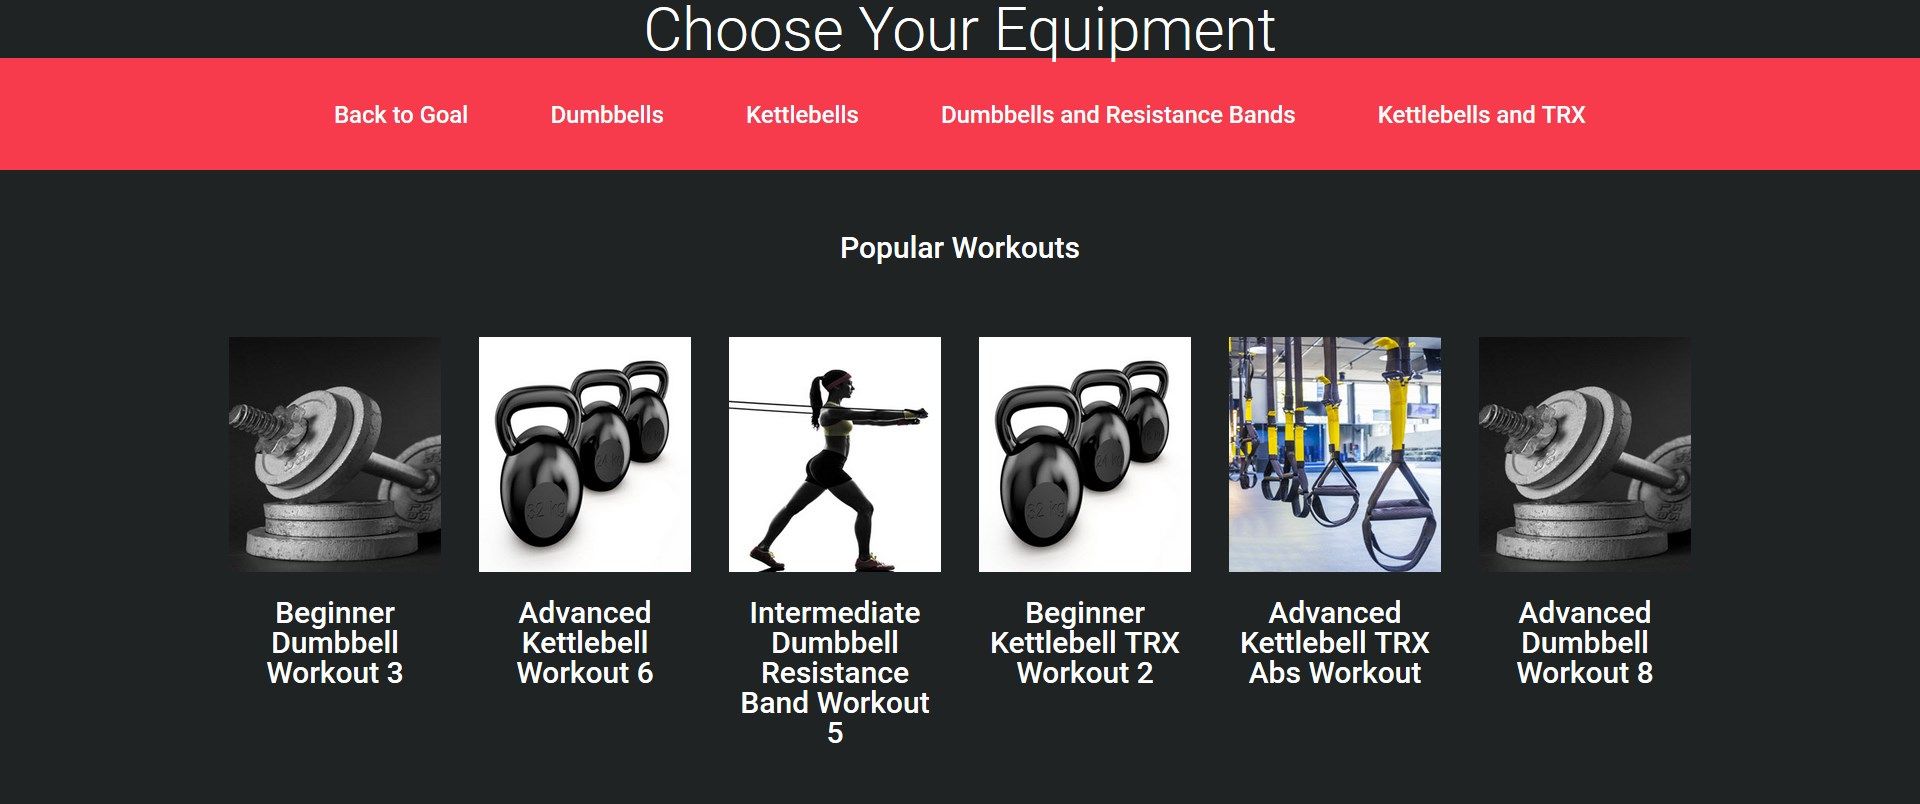 Choose Your Equipment